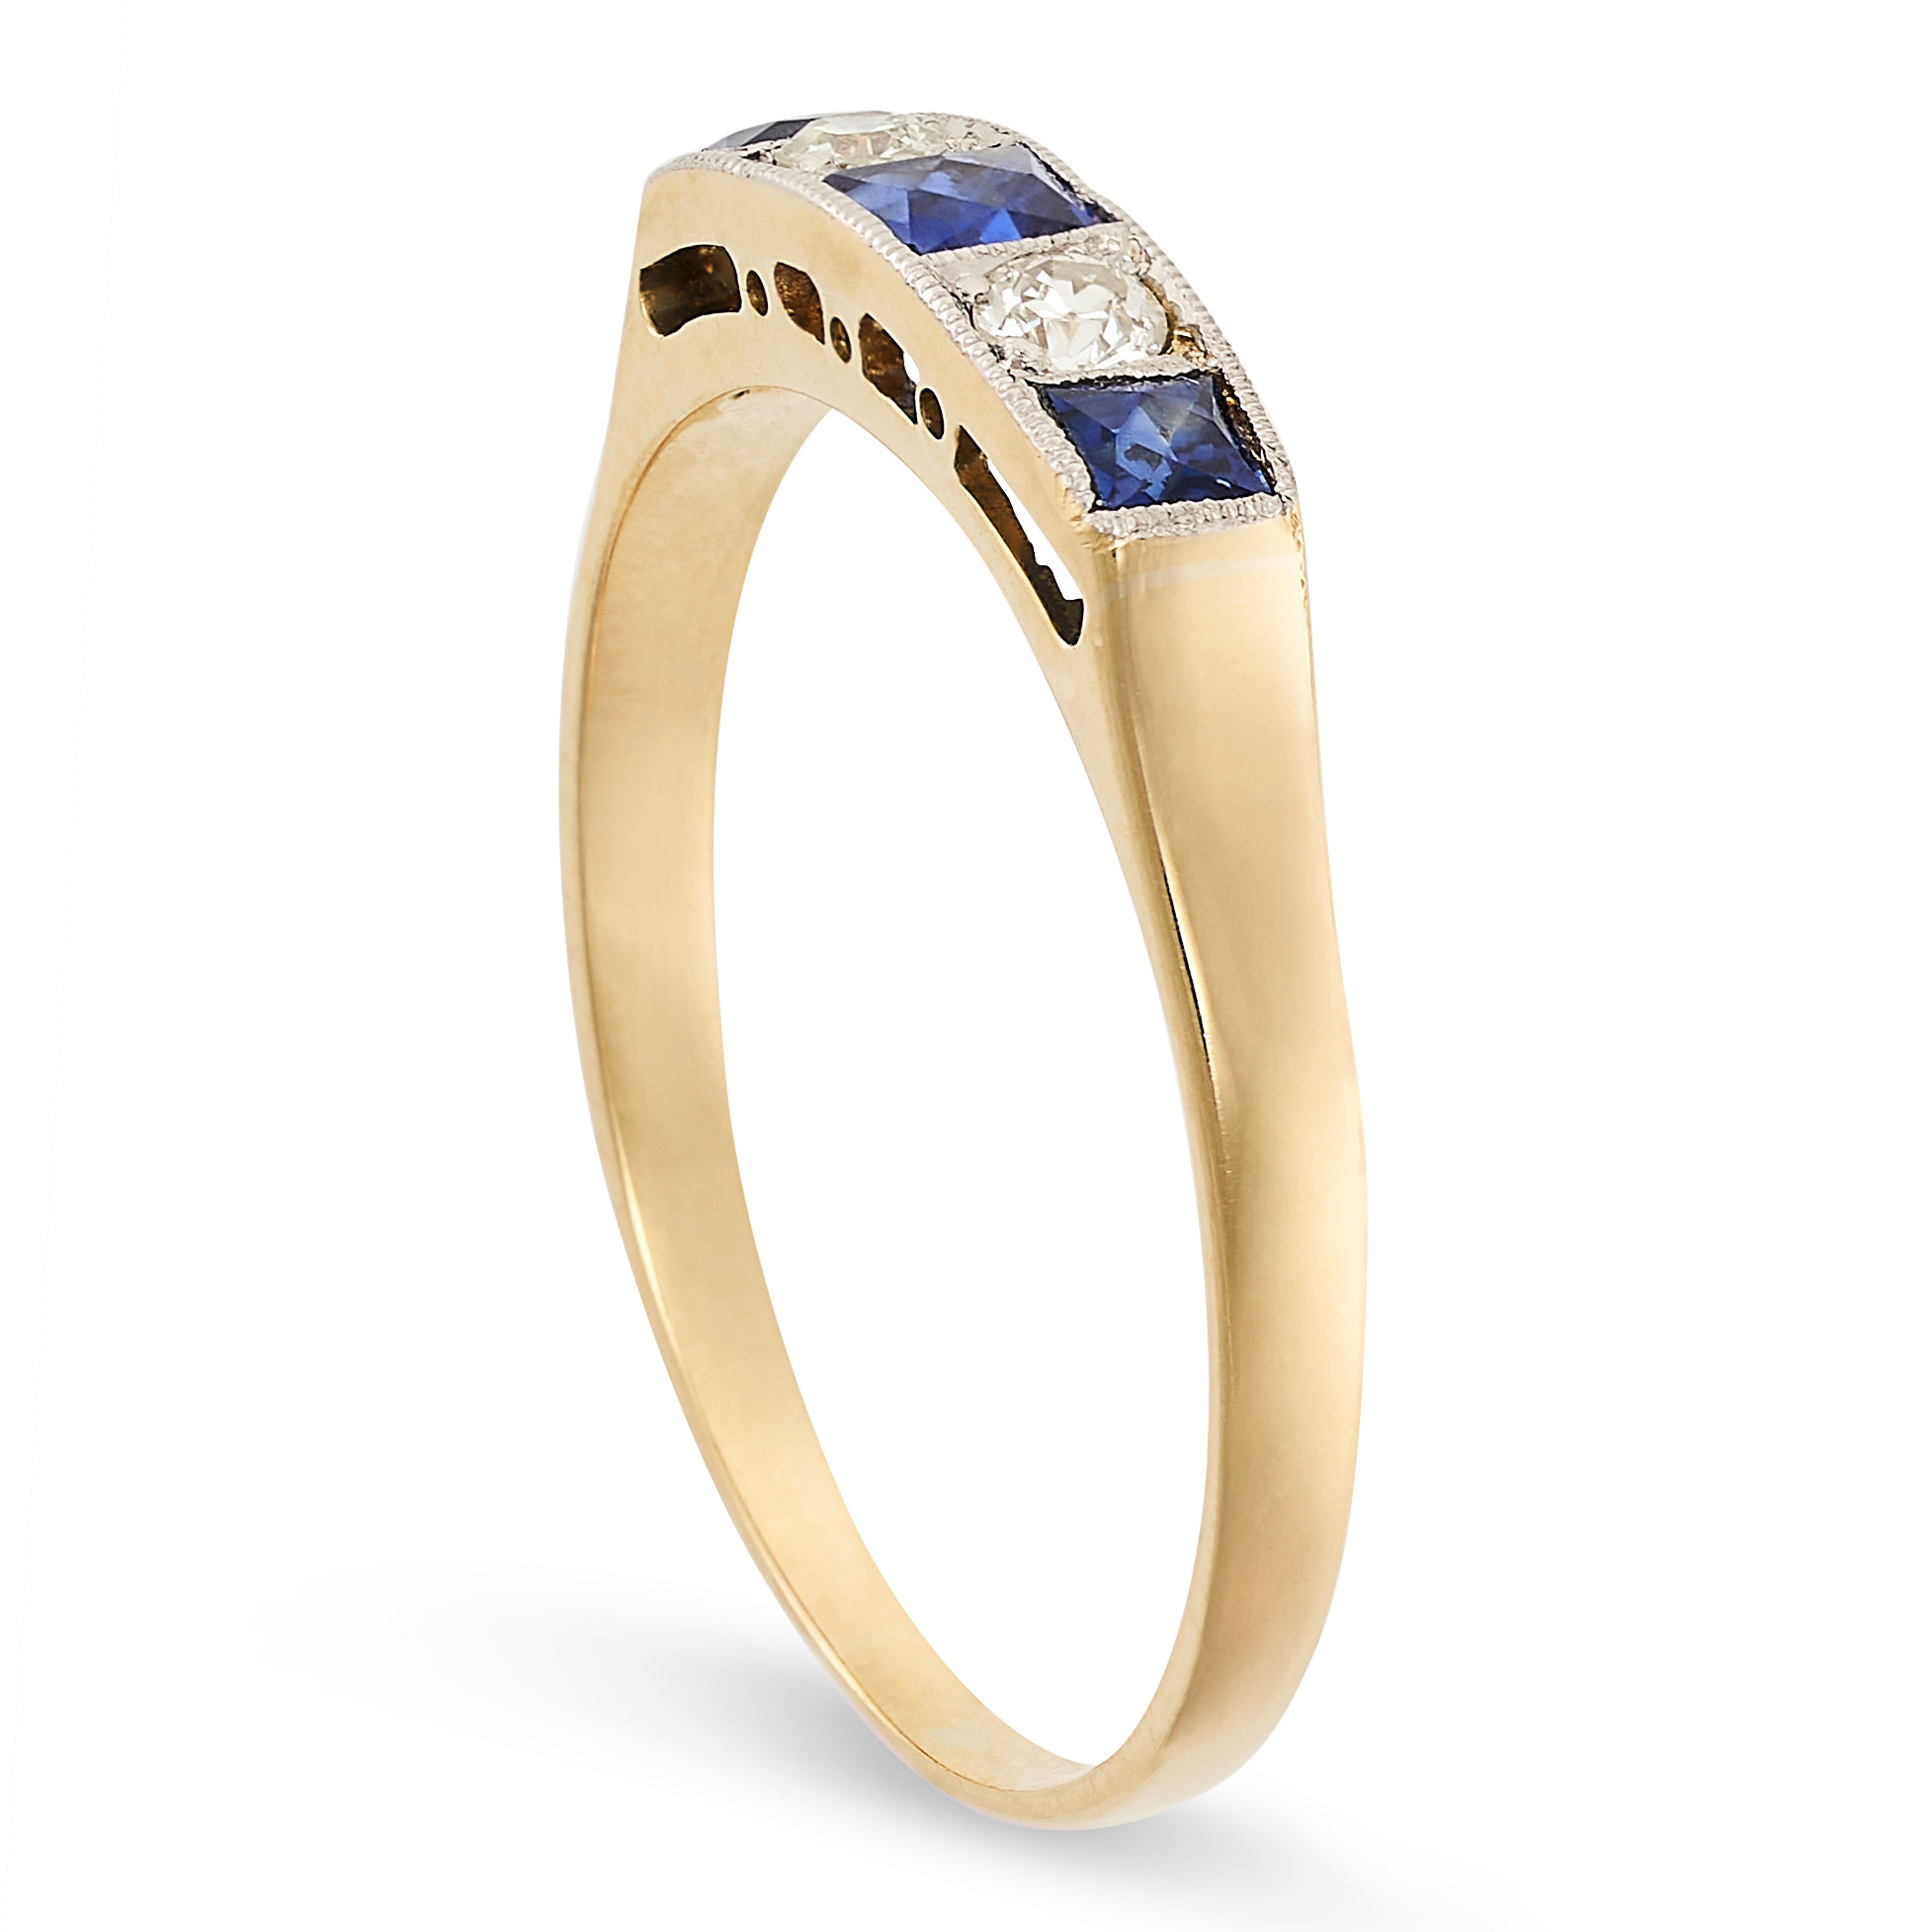 A SAPPHIRE AND DIAMOND RING in yellow gold, set with a row of alternating French cut sapphires and - Image 2 of 2